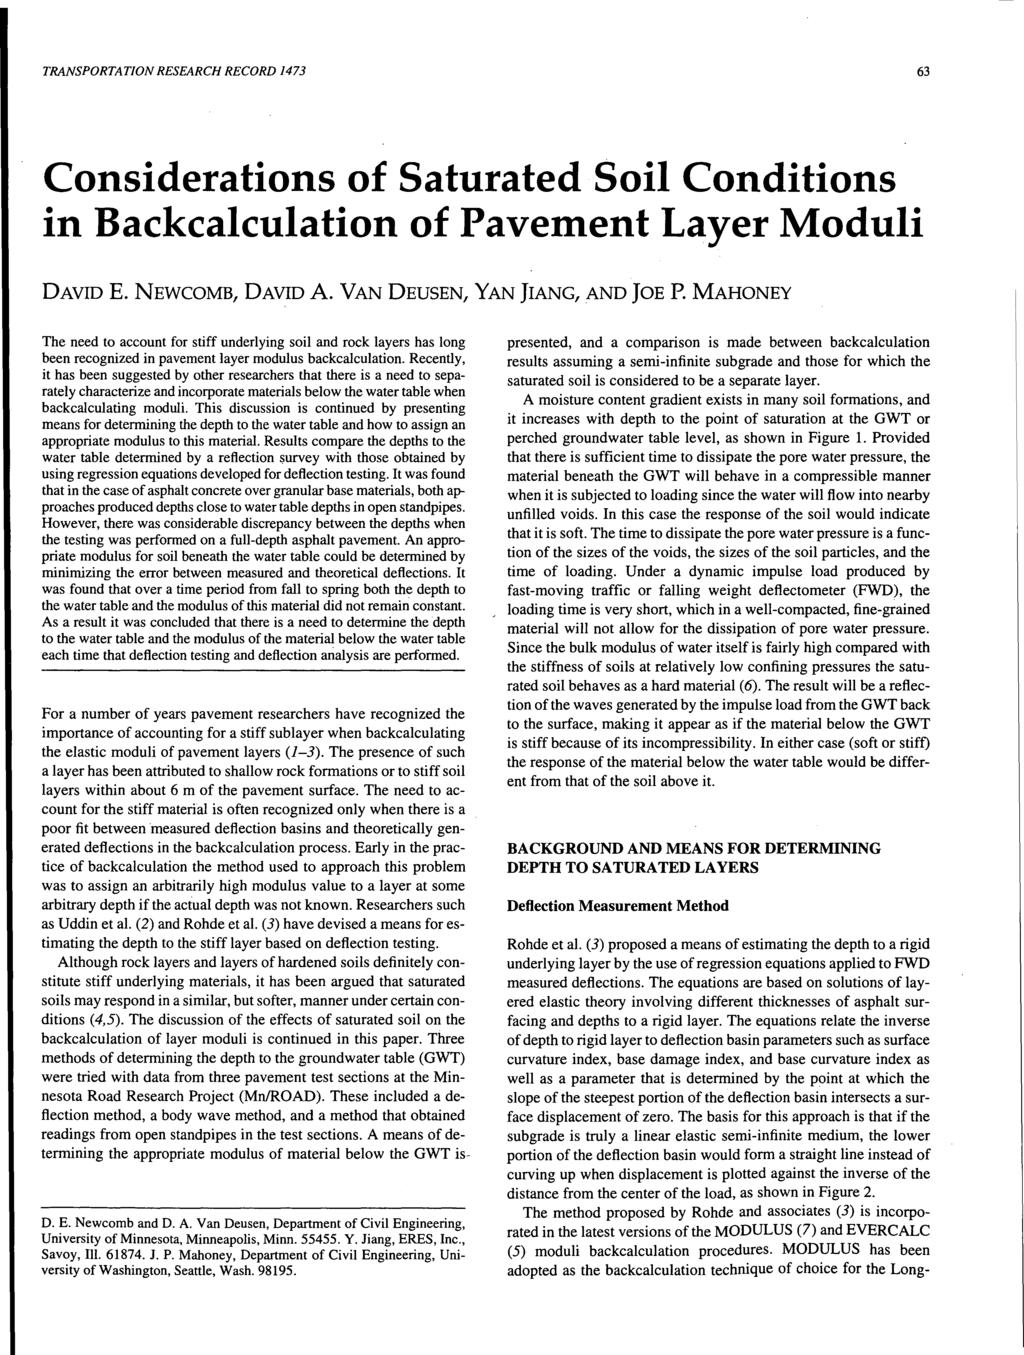 TRANSPORTATION RESEARCH RECORD 1473 63 Considerations of Saturated Soil Conditions in Backcalculation of Pavement Layer Moduli DAVIDE. NEWCOMB, DAVID A. VANDEUSEN, YAN JIANG, AND JOE P.